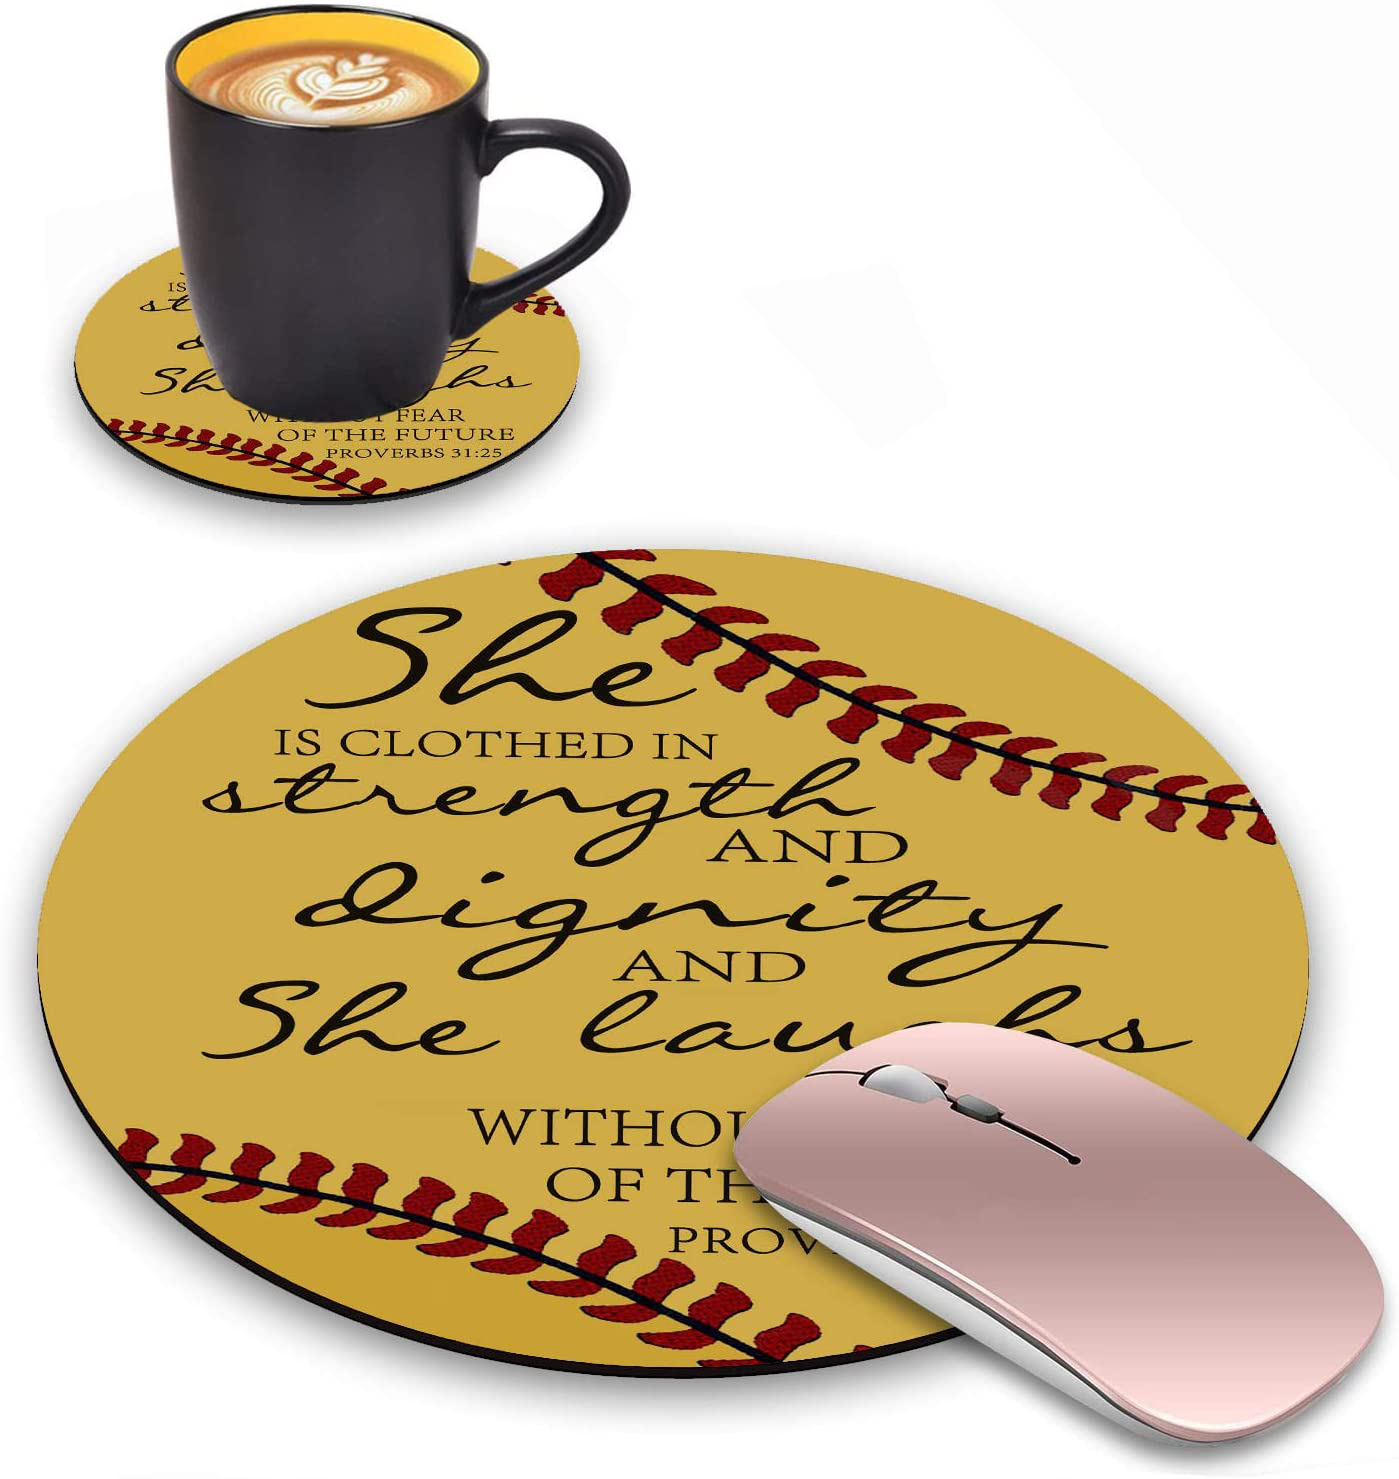 Round Mouse Pad with Coasters Set, Softball Surface Quotes Inspirational Quotes Bible Verse Phil 4:13 Design Mouse Pad, Non-Slip Rubber Base Mouse Pads for Laptop and Computer Office Accessories